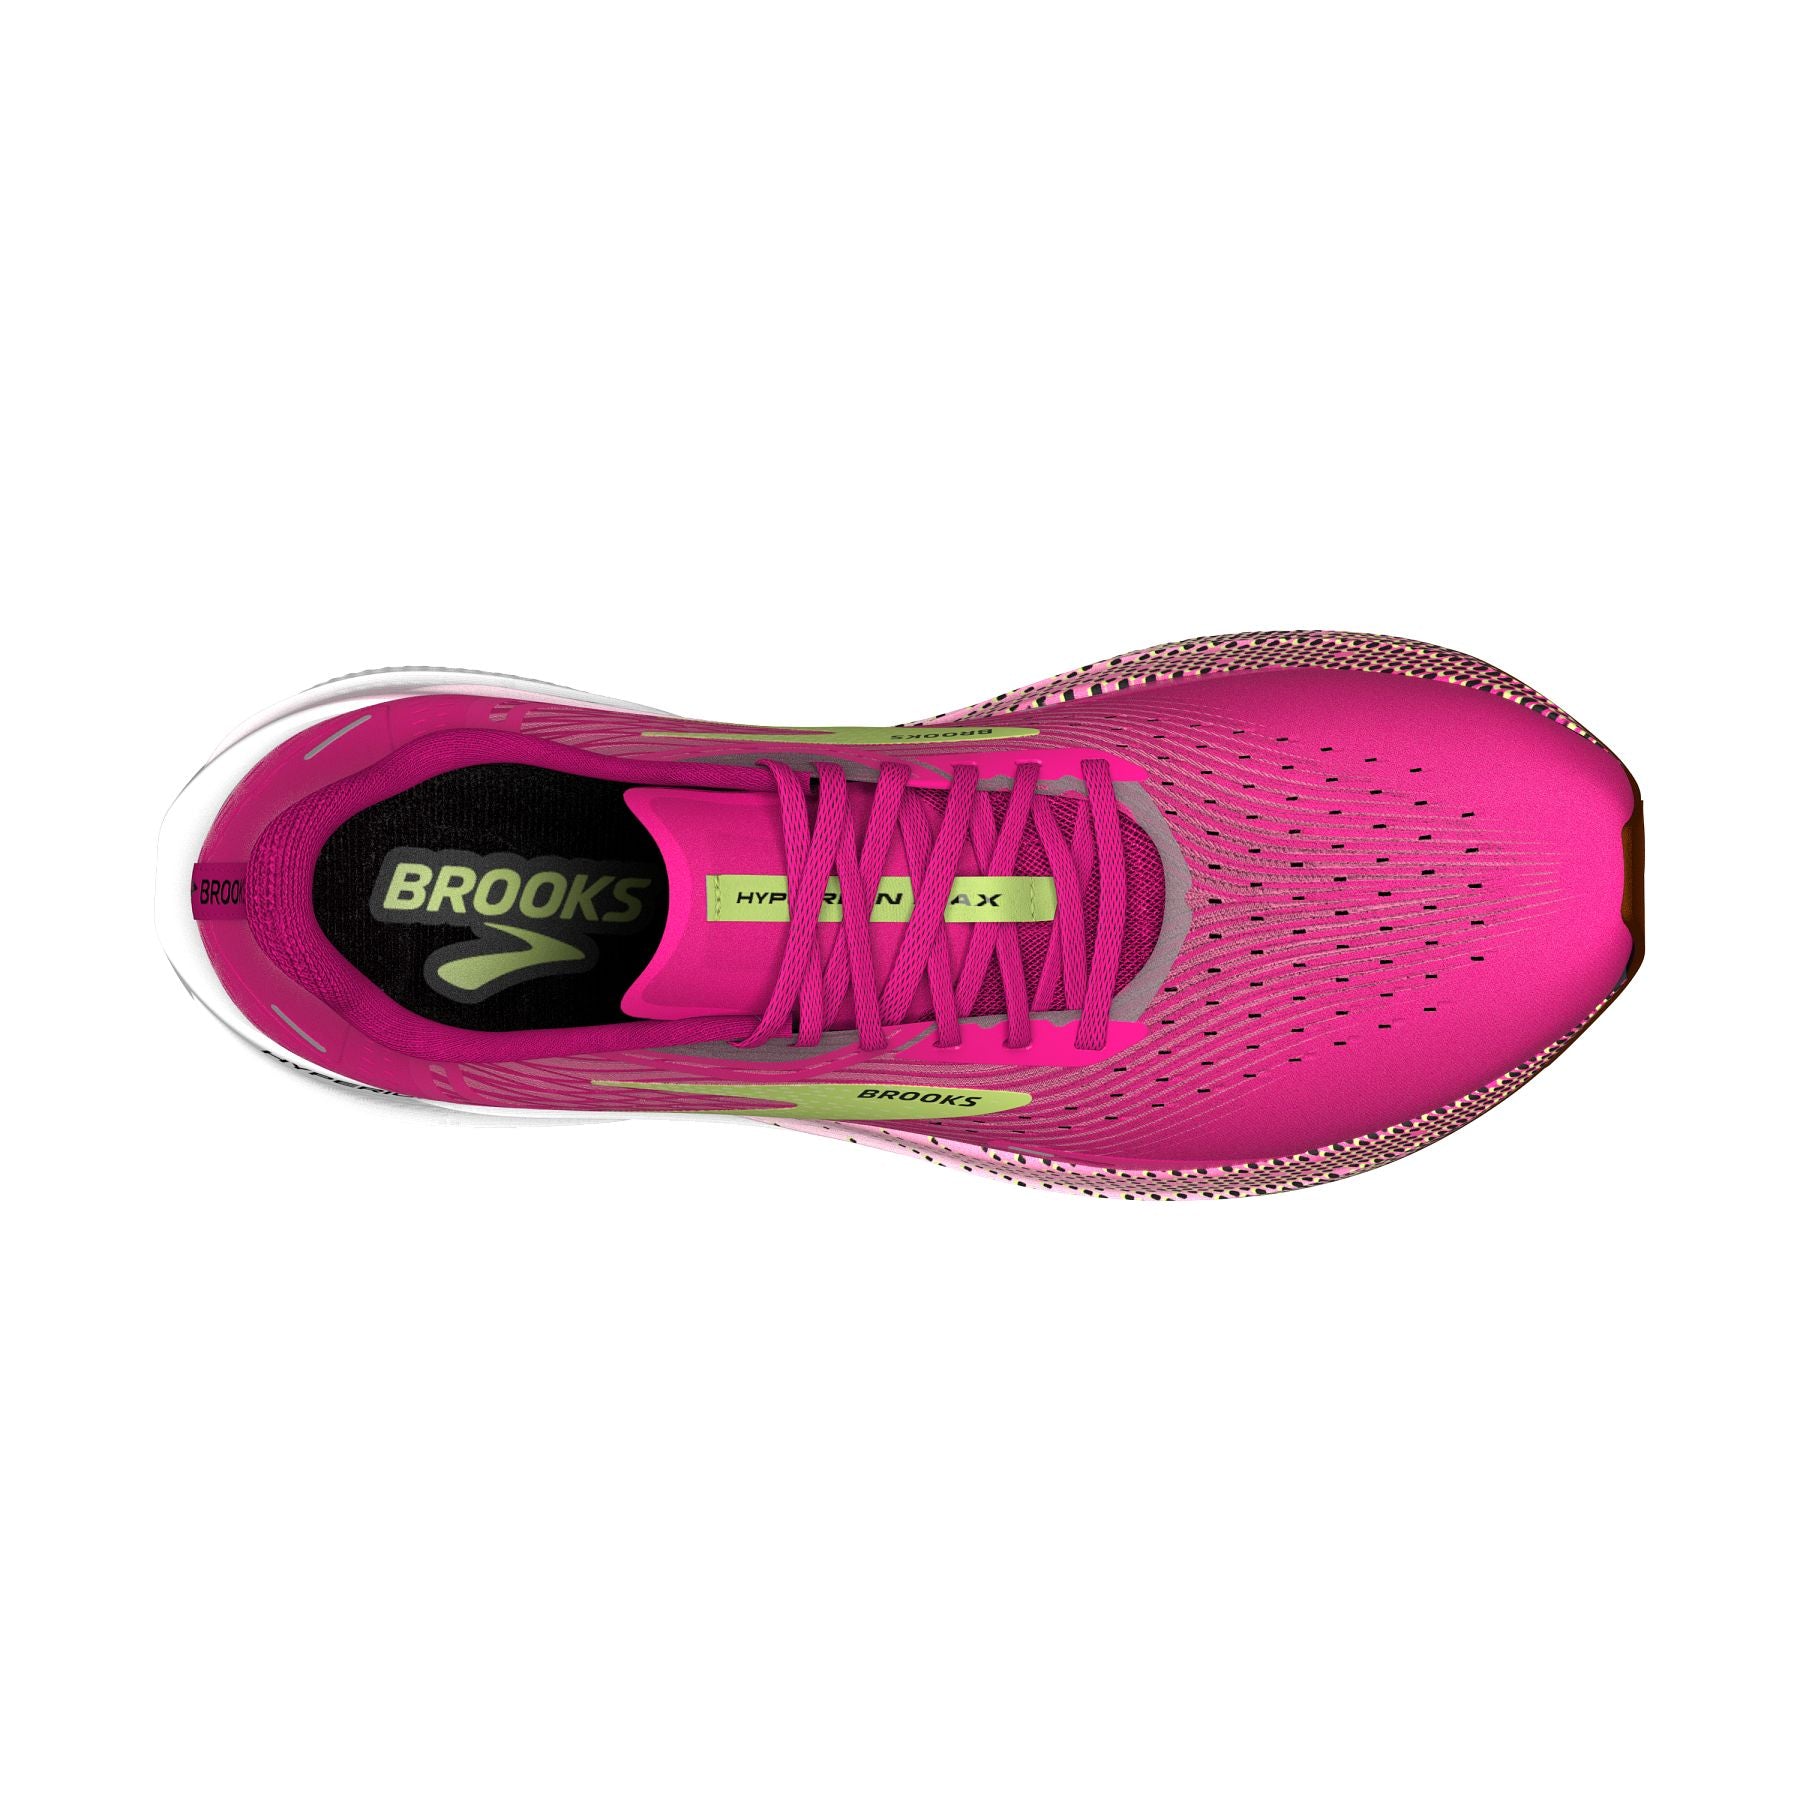 Top view of the Women's Hyperion Max by Brook's in the color Pink Glo/Green/Black